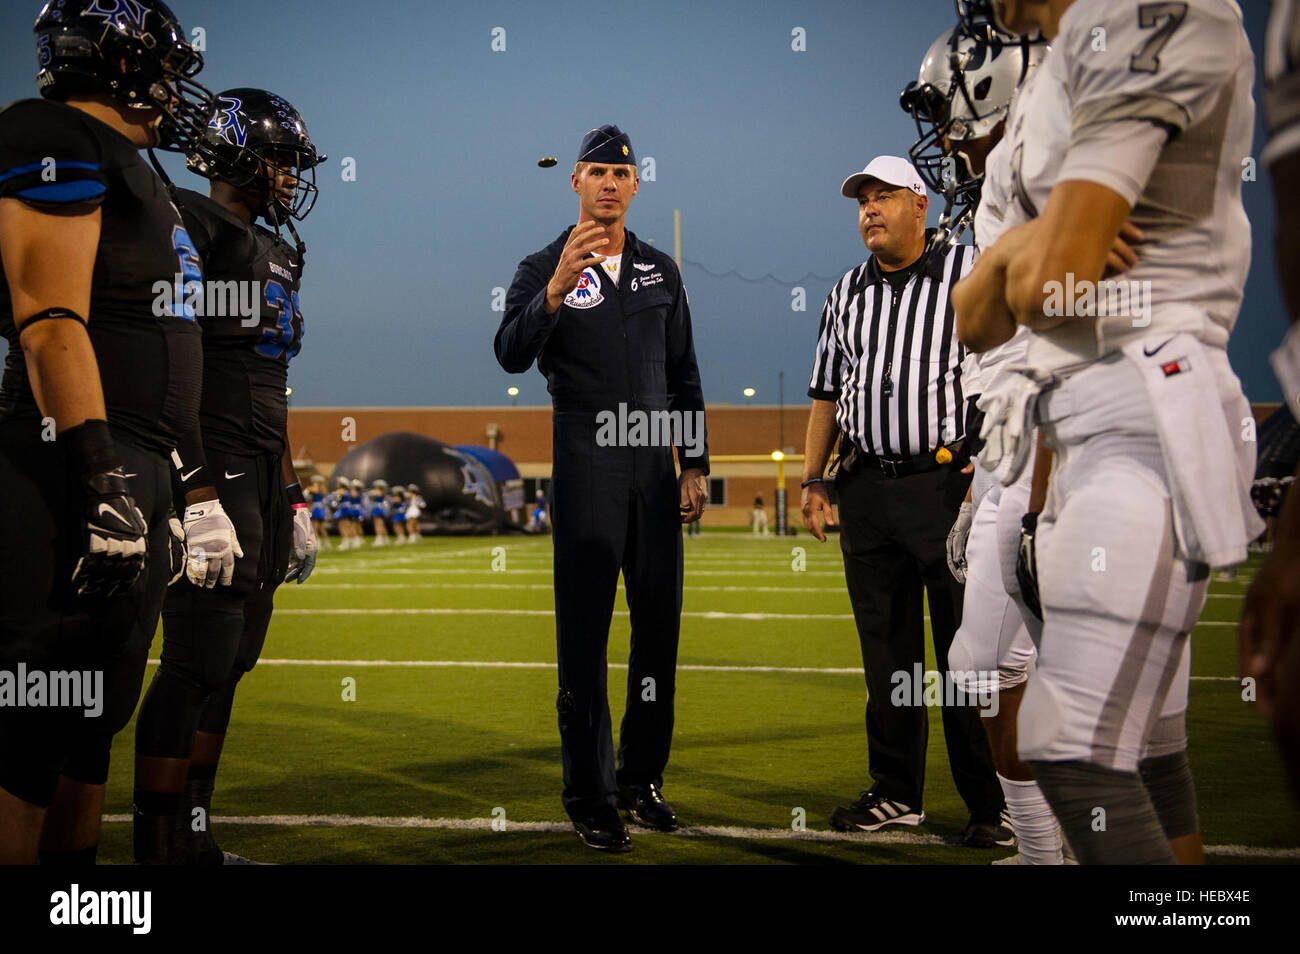 Maj. Jason Curtis, Thunderbird 6, performs the coin toss to start a high school football game at Forth Worth, Texas, Oct. 24, 2014. (U.S. Air Force photo/Tech. Sgt. Manuel J. Martinez) Stock Photo